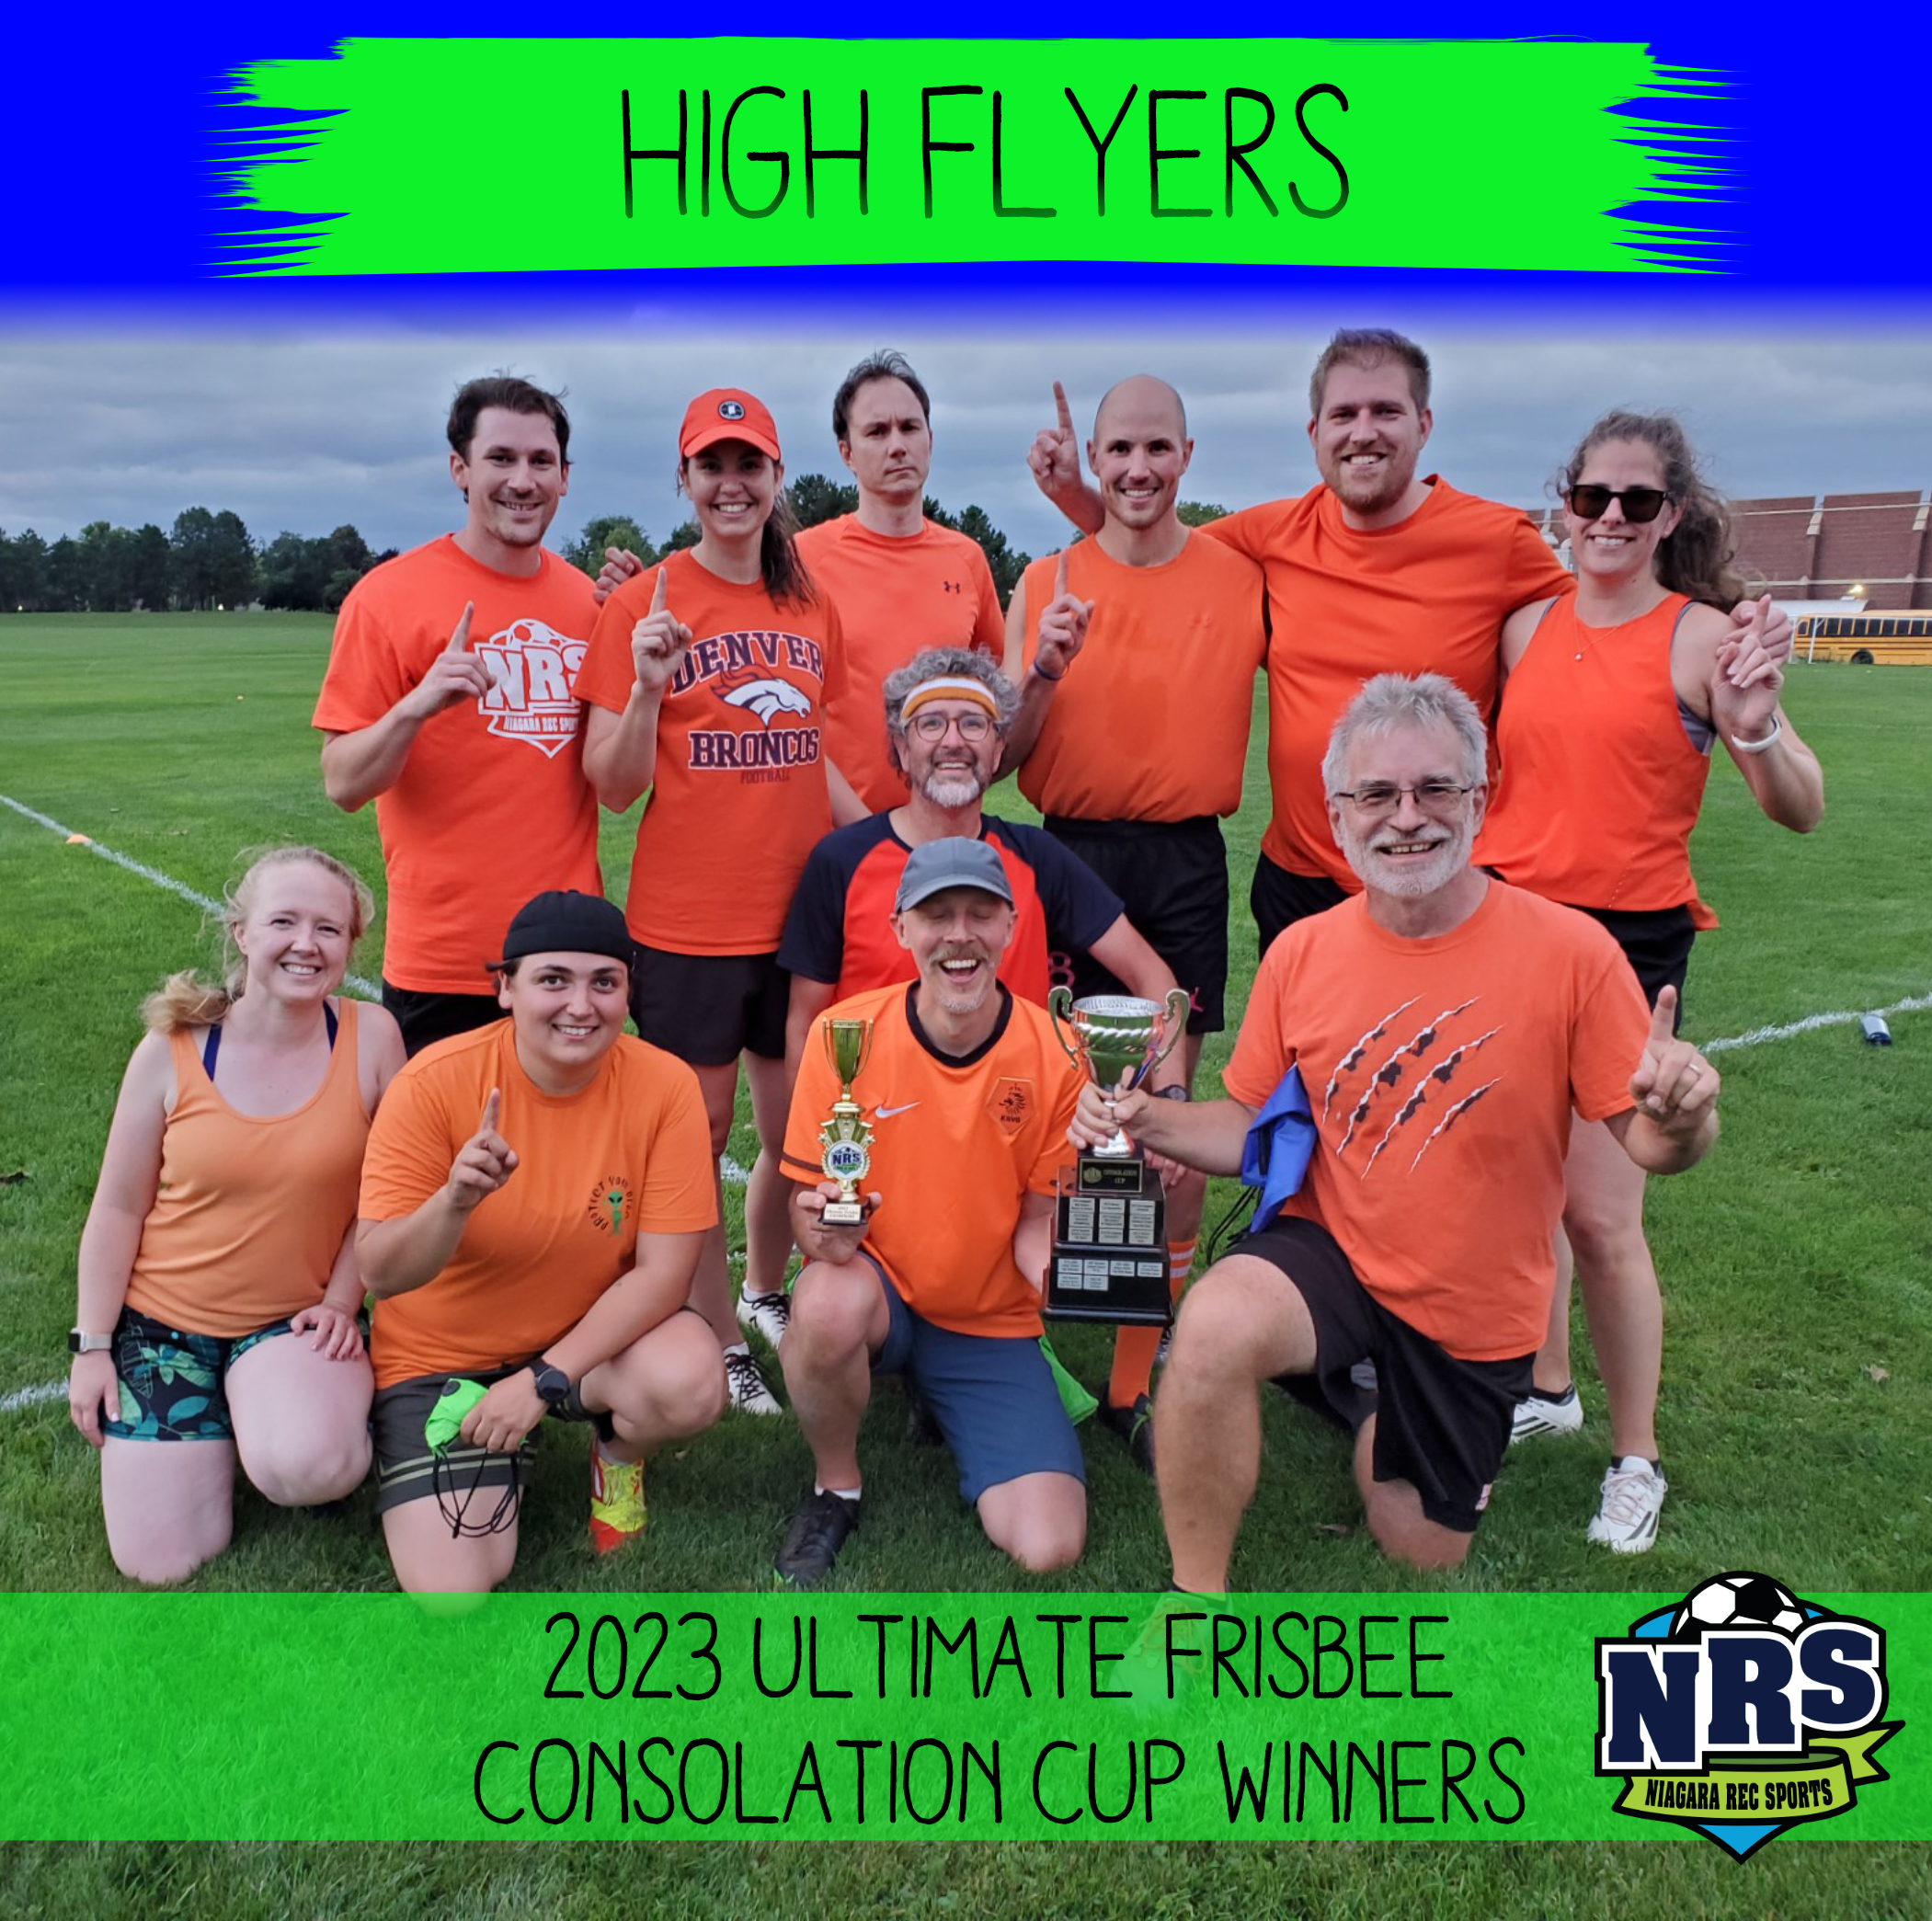 NRS 2023 Ultimate Frisbee Consolation Cup Winners High Flyers